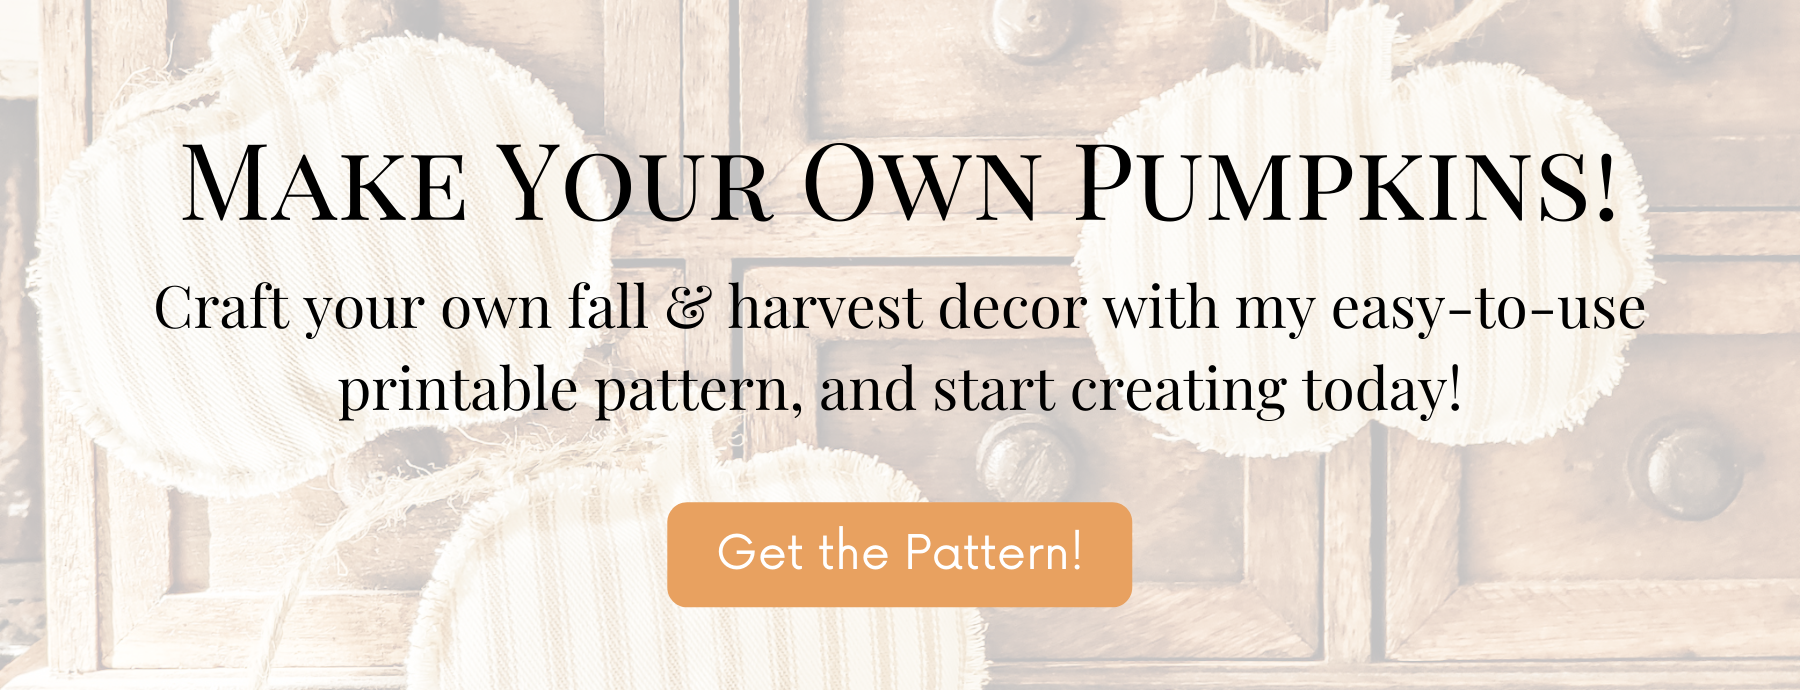 Click to download the printable pumpkin pattern